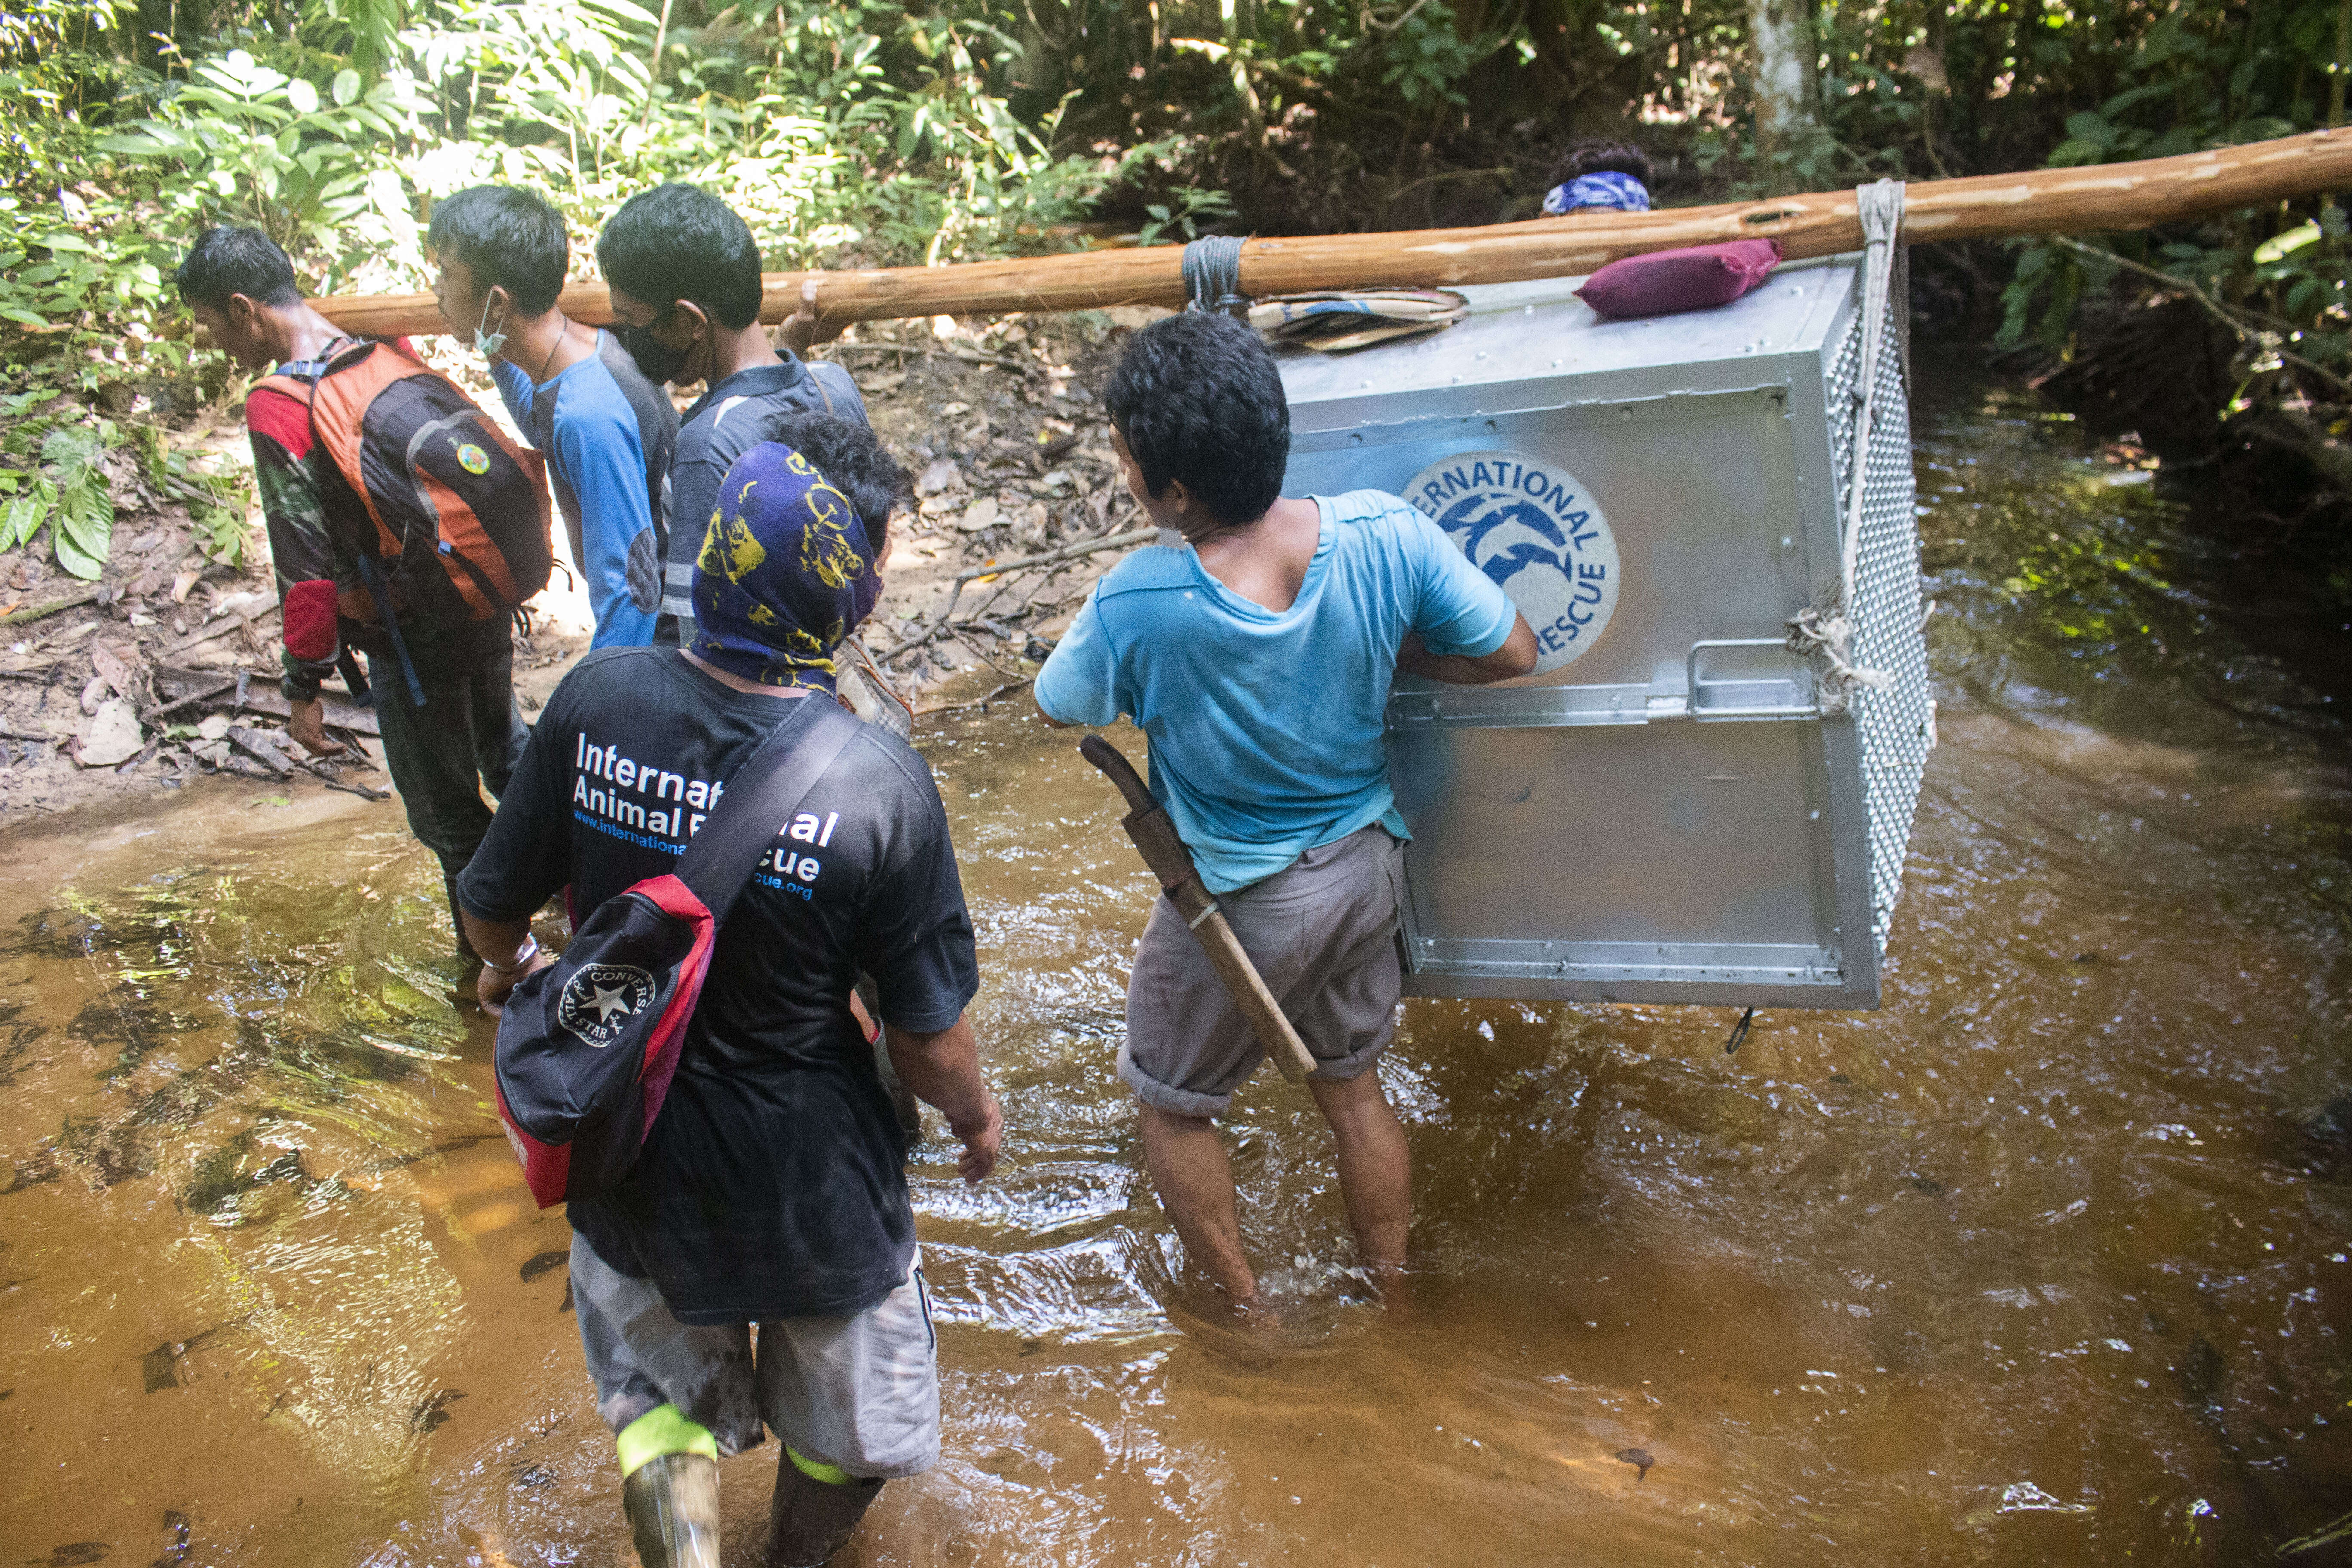 Rescuers carrying rescued orangutan and baby back into the wild